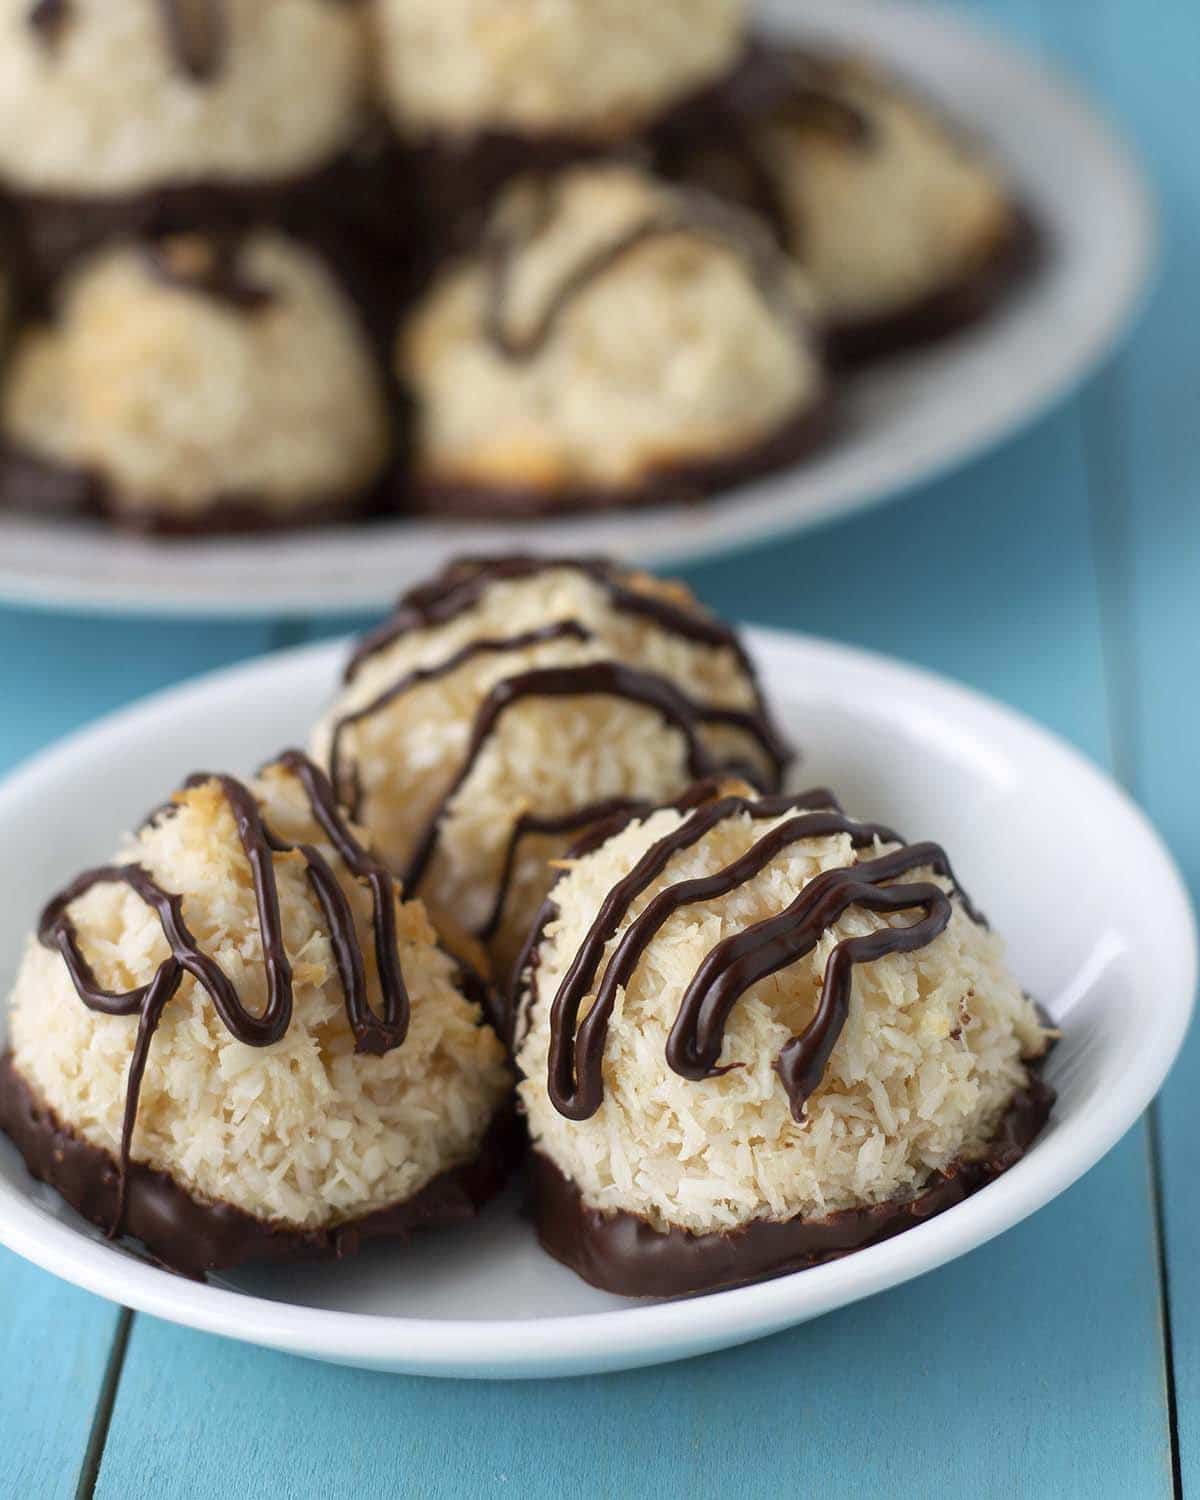 Vegan coconut macaroons topped with chocolate.